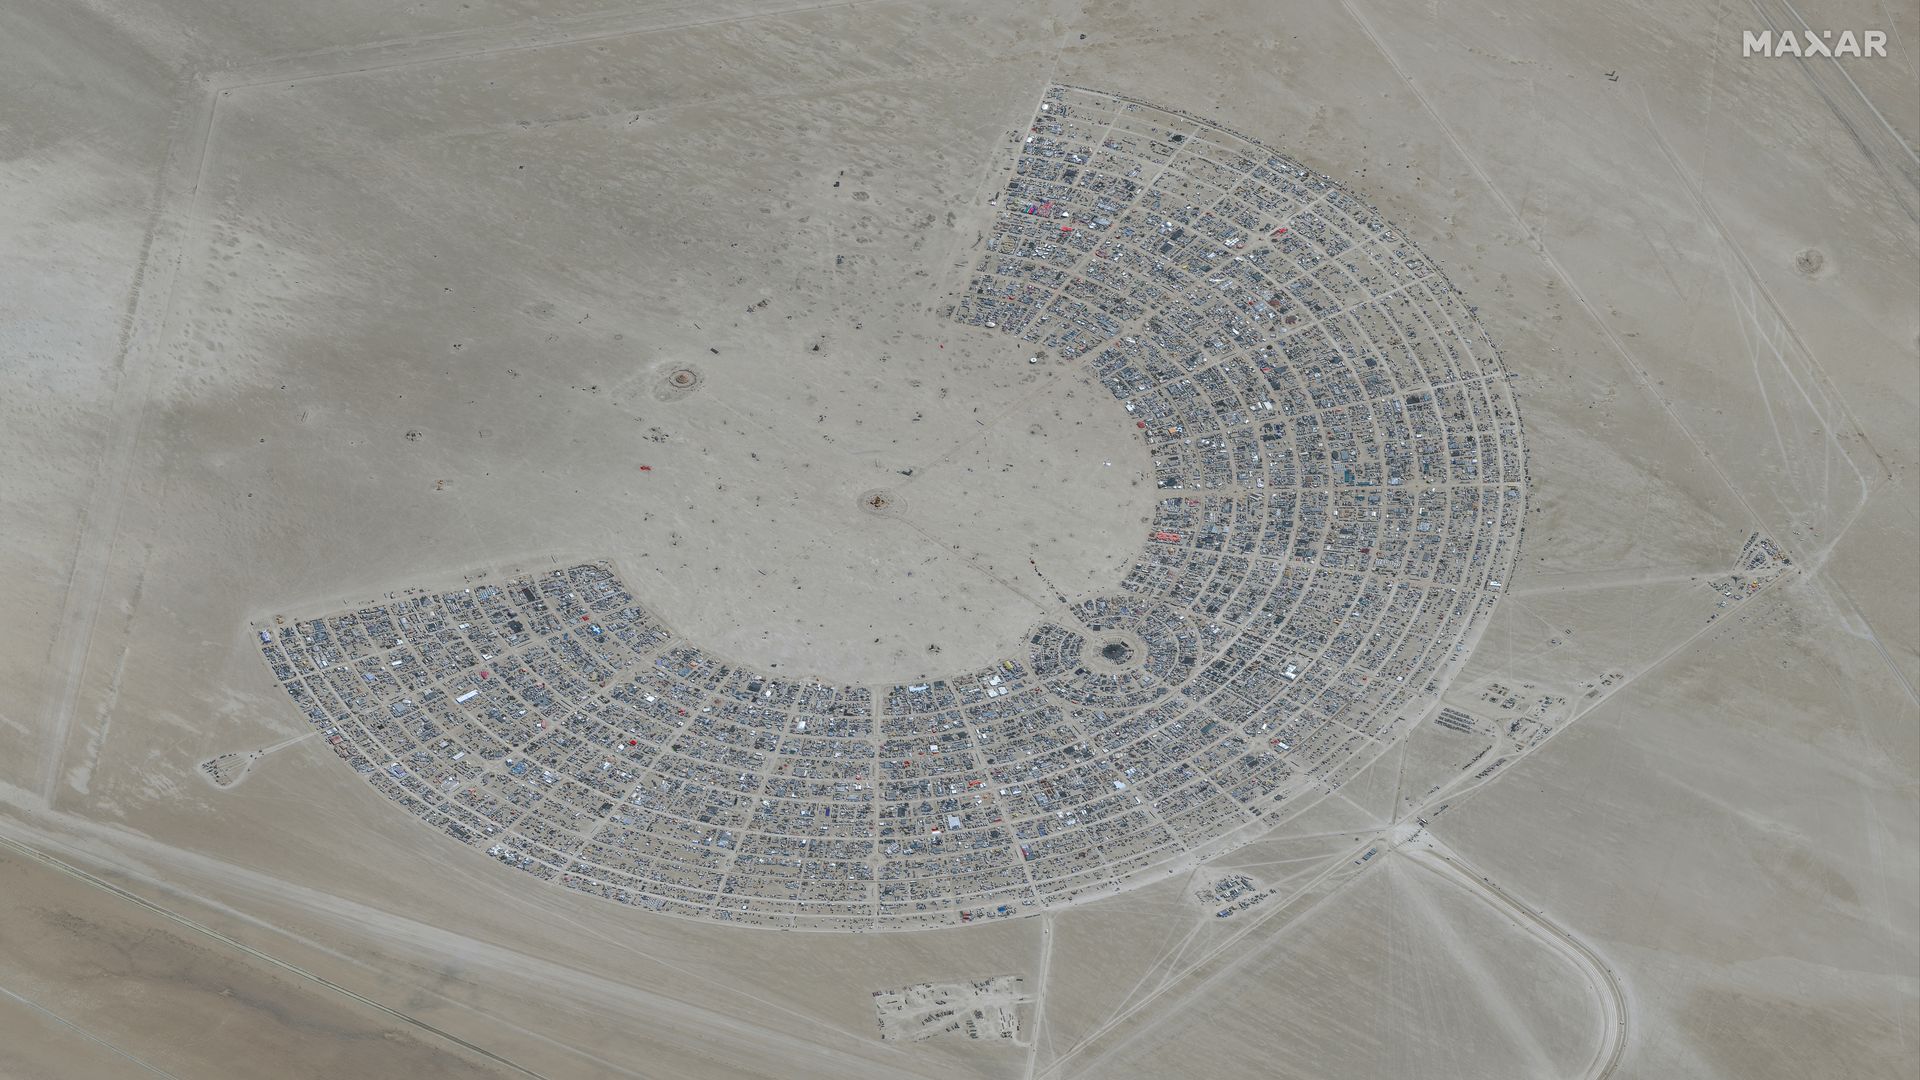 What we know about flooding at Burning Man